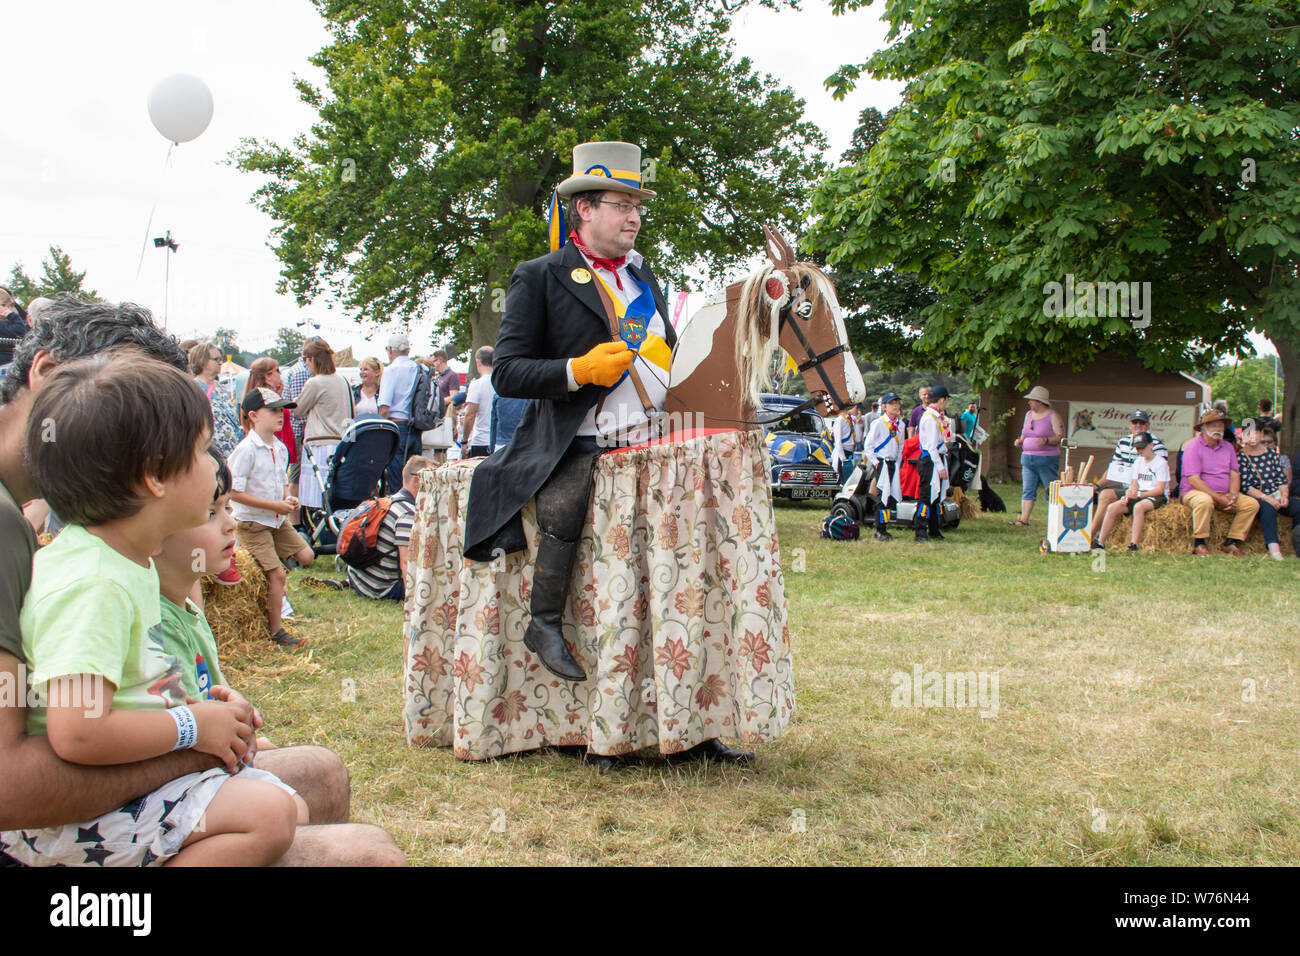 The Hobby Horse, part of the traditional Illmington morris men group of dancers entertaining the crowd at the Countryfile Live 2019 Show, UK Stock Photo